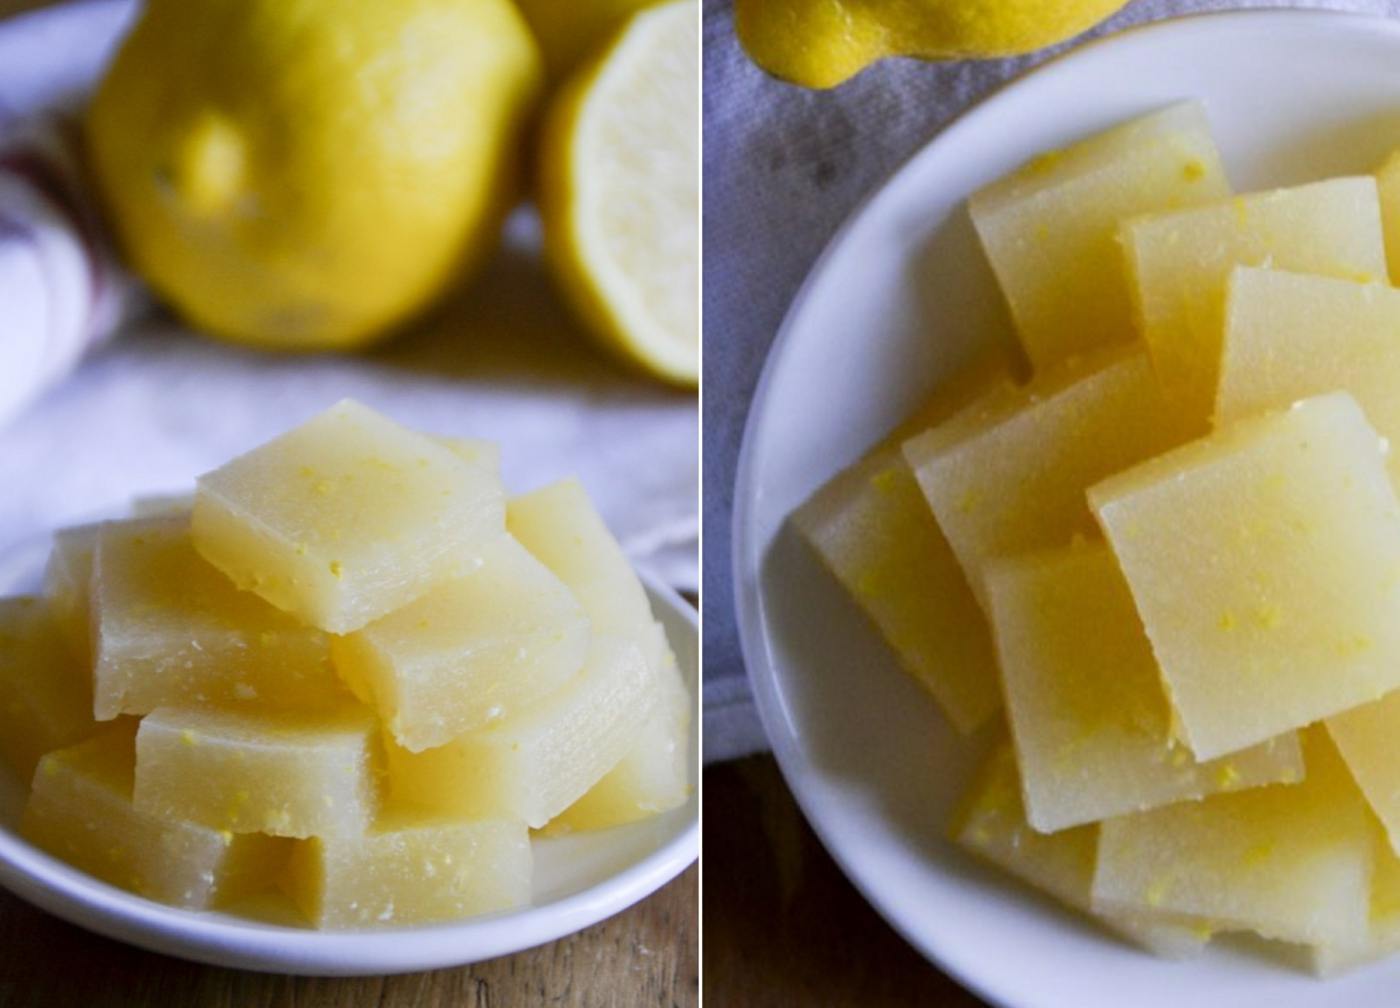 Make fruit gum yourself with gelatine, lemon and ginger for kids and adults